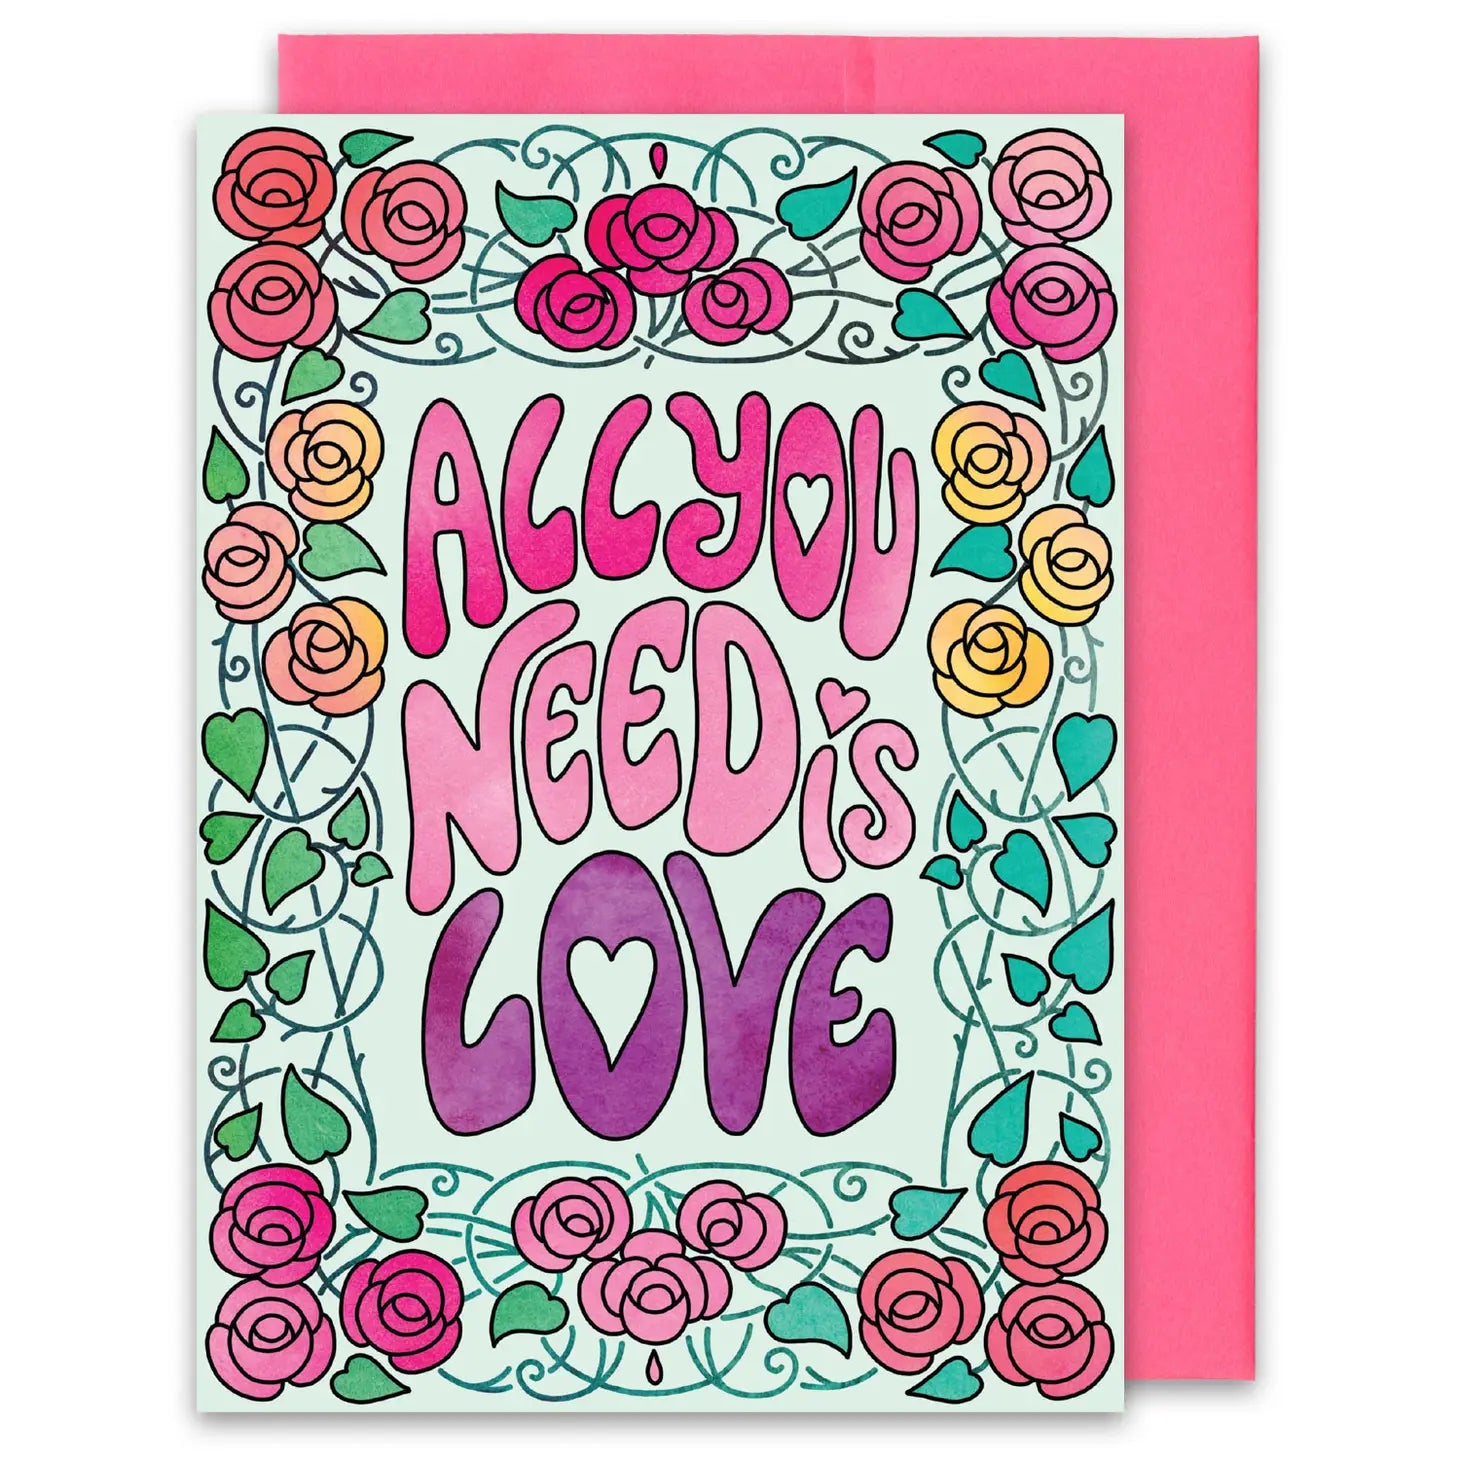 All You Need Is Love  Card - Moon Room Shop and Wellness